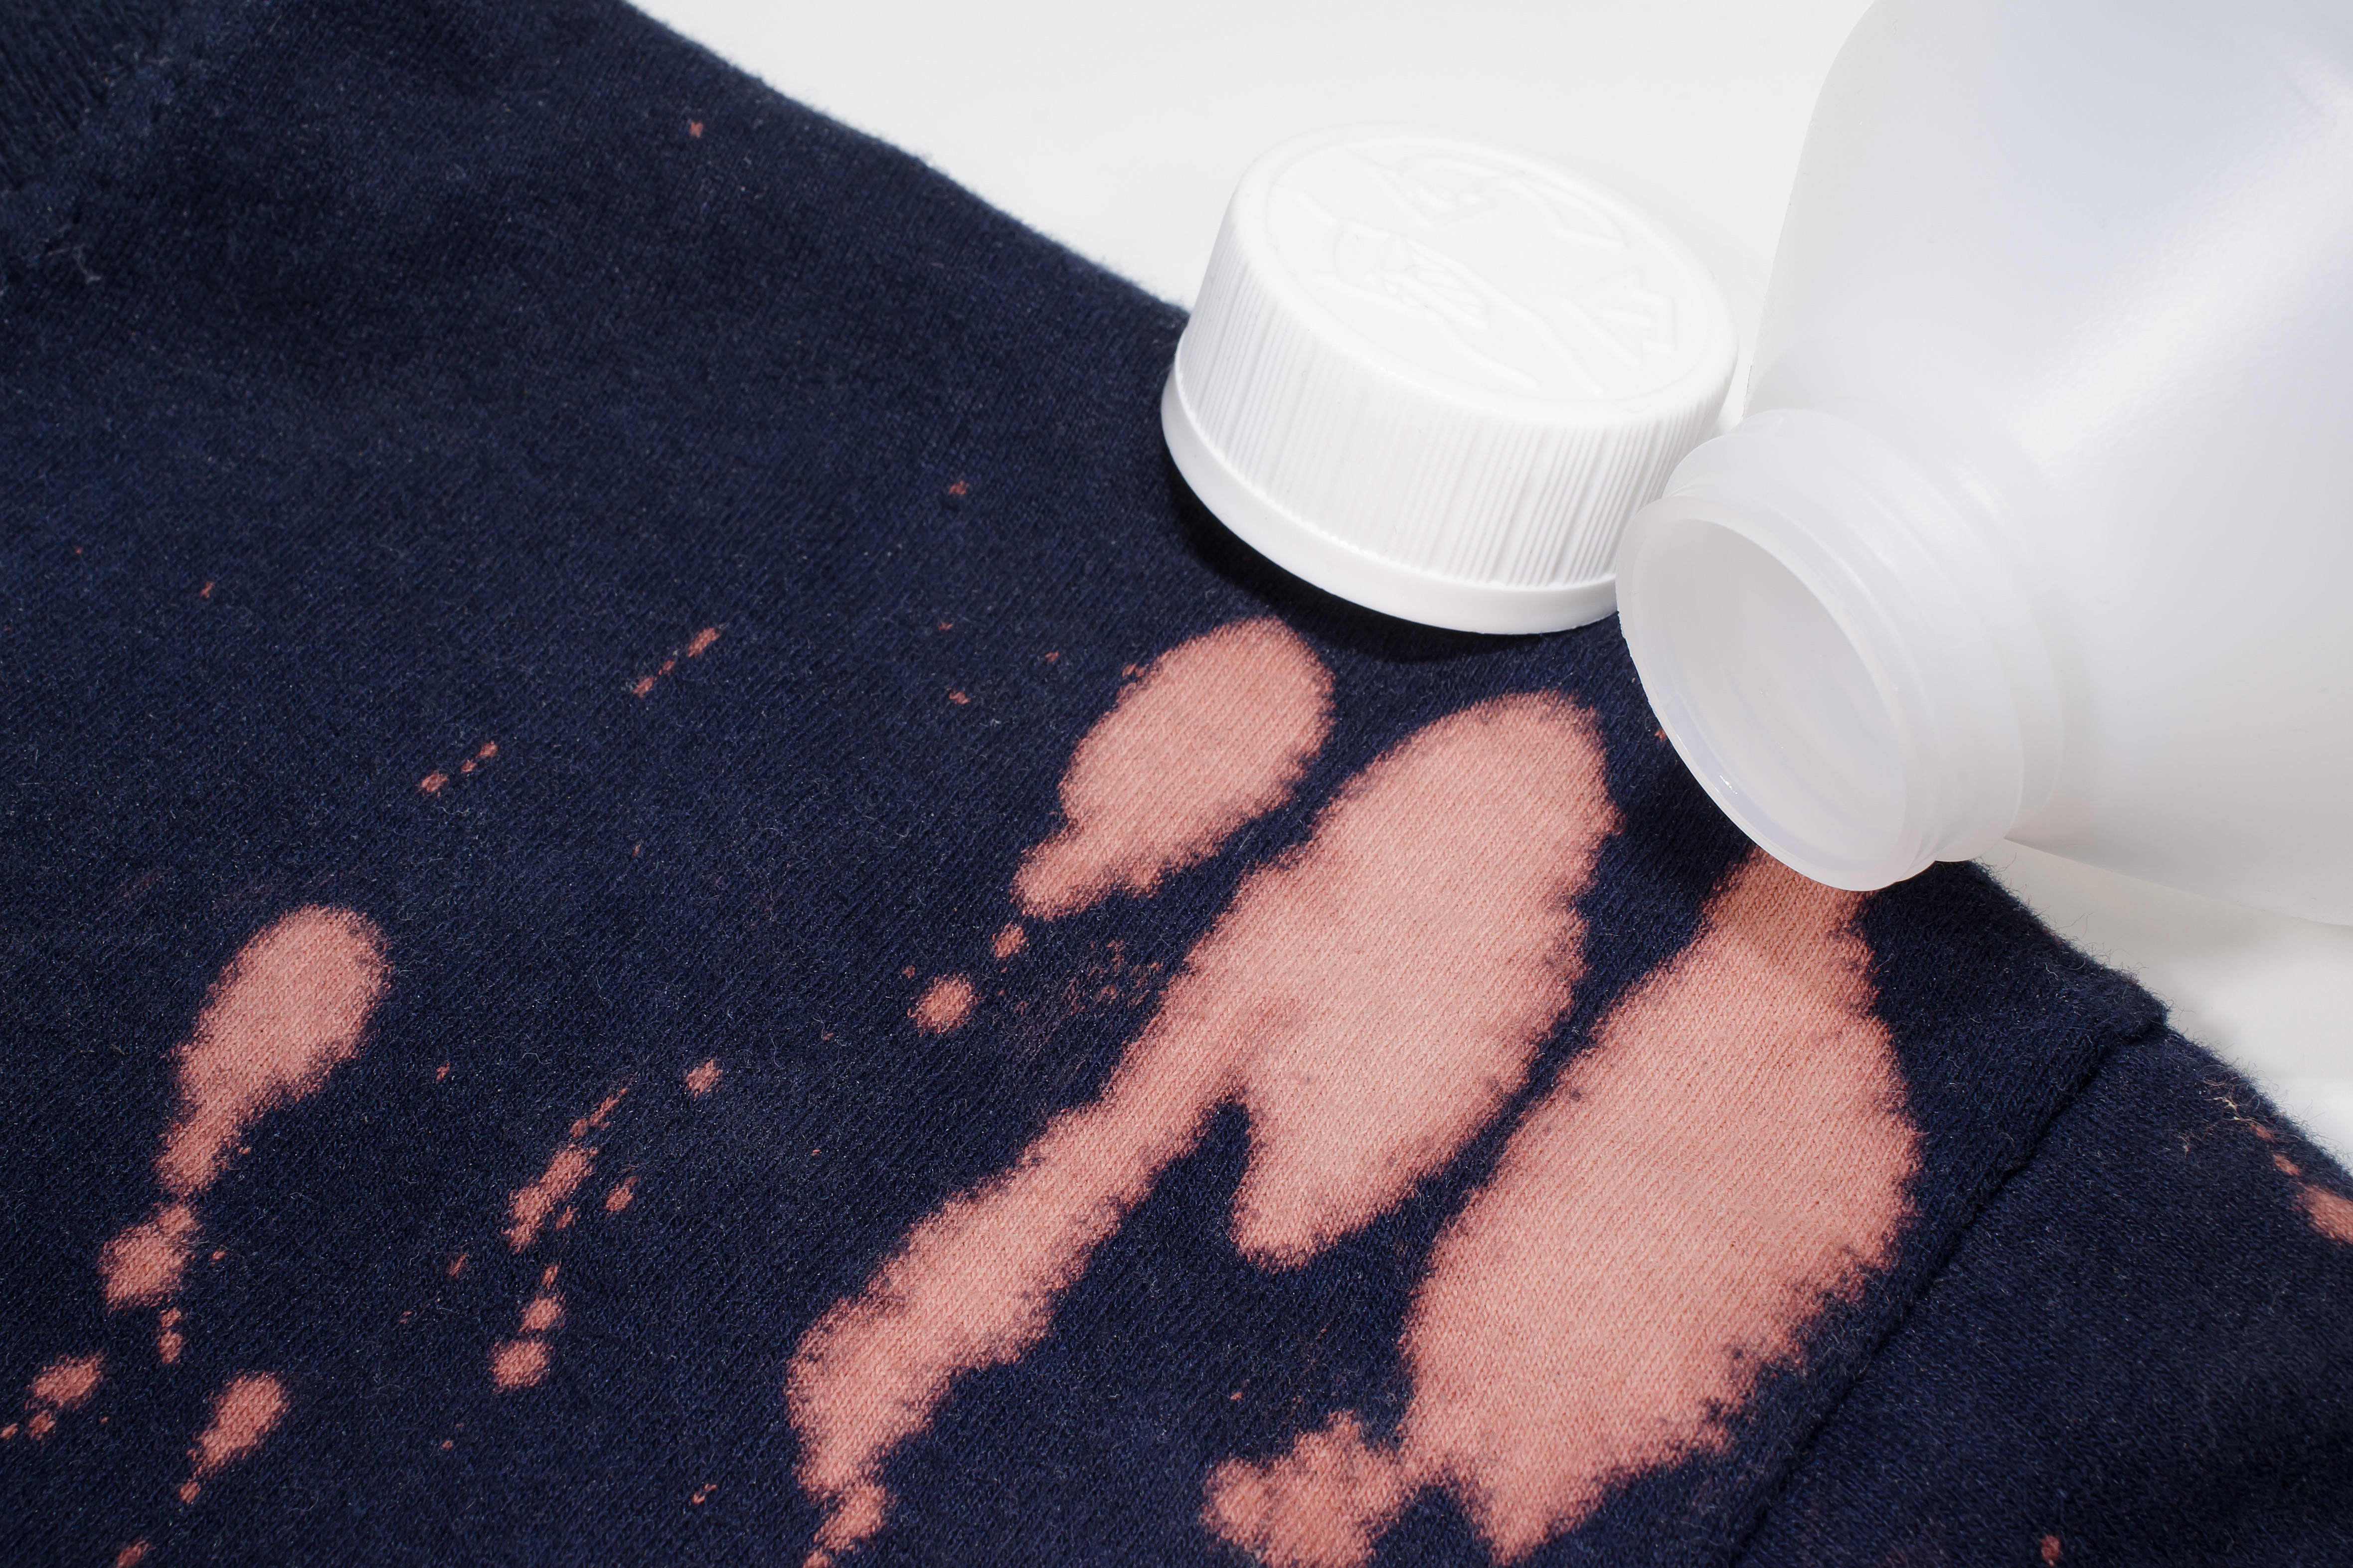 Removing Bleach Stains from Clothing - Easy DIY Guide